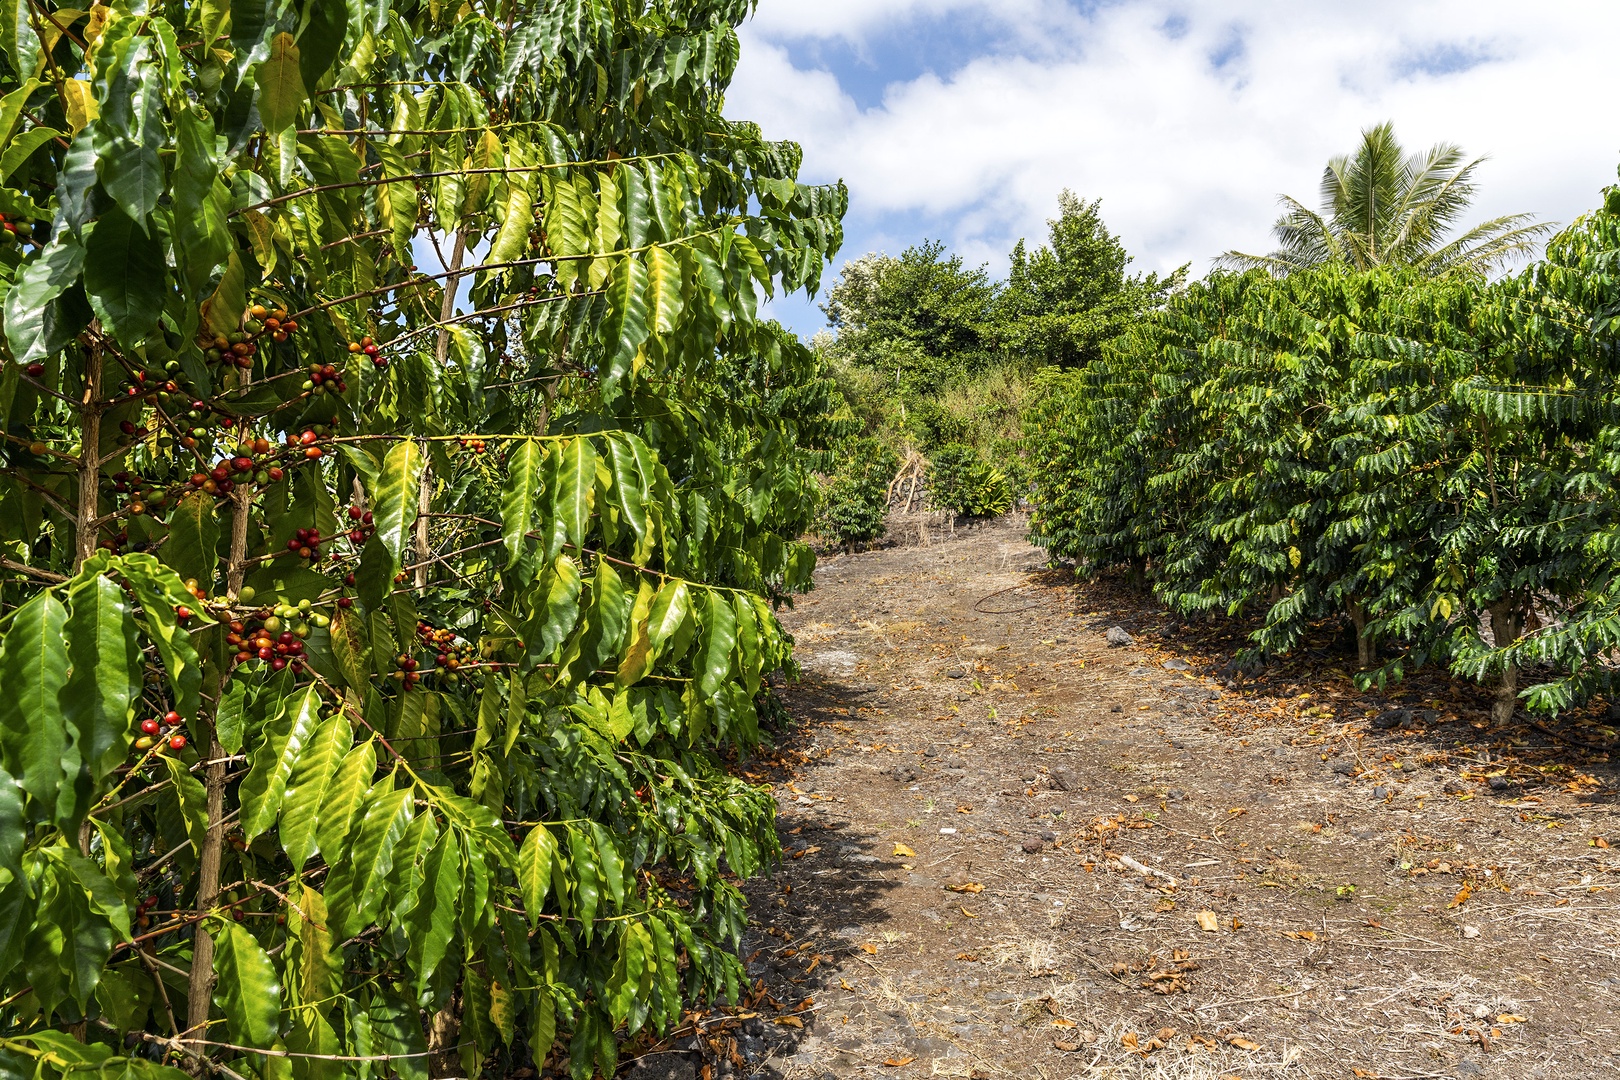 Kailua Kona Vacation Rentals, Piko Nani - Maintained coffee farm on the lower portion of the property